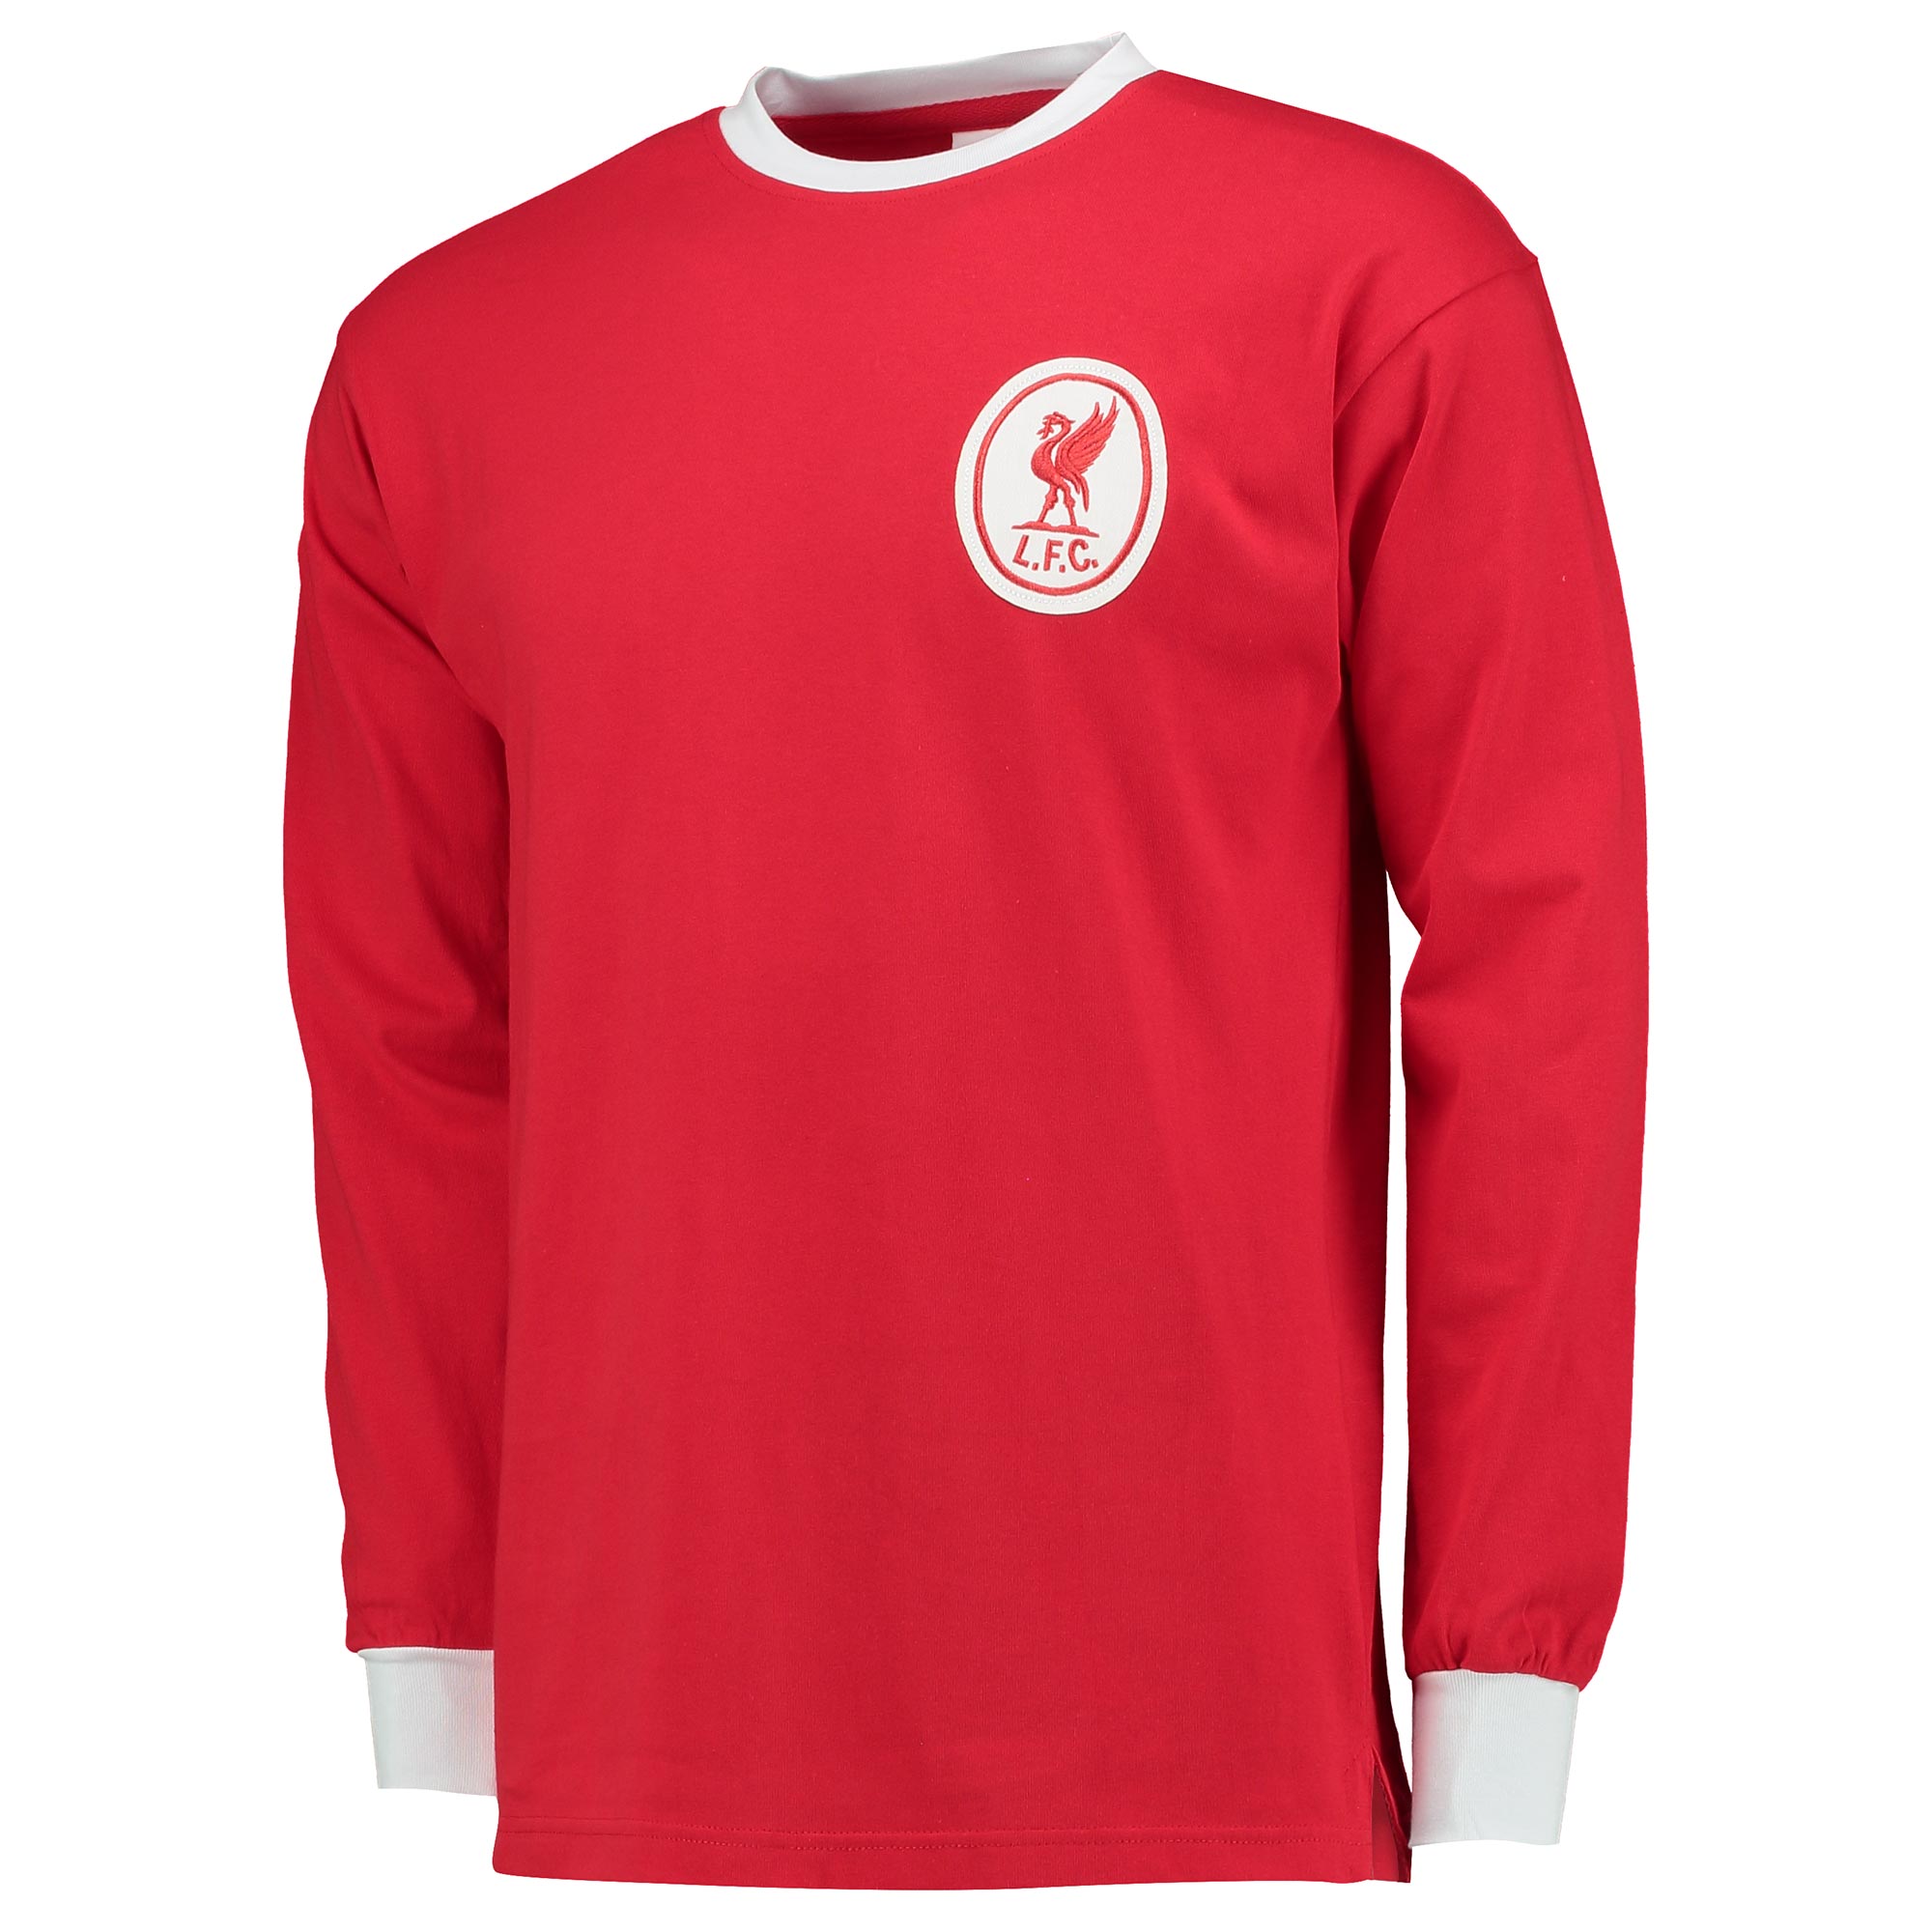 Buy Retro Replica Liverpool old fashioned football shirts and soccer